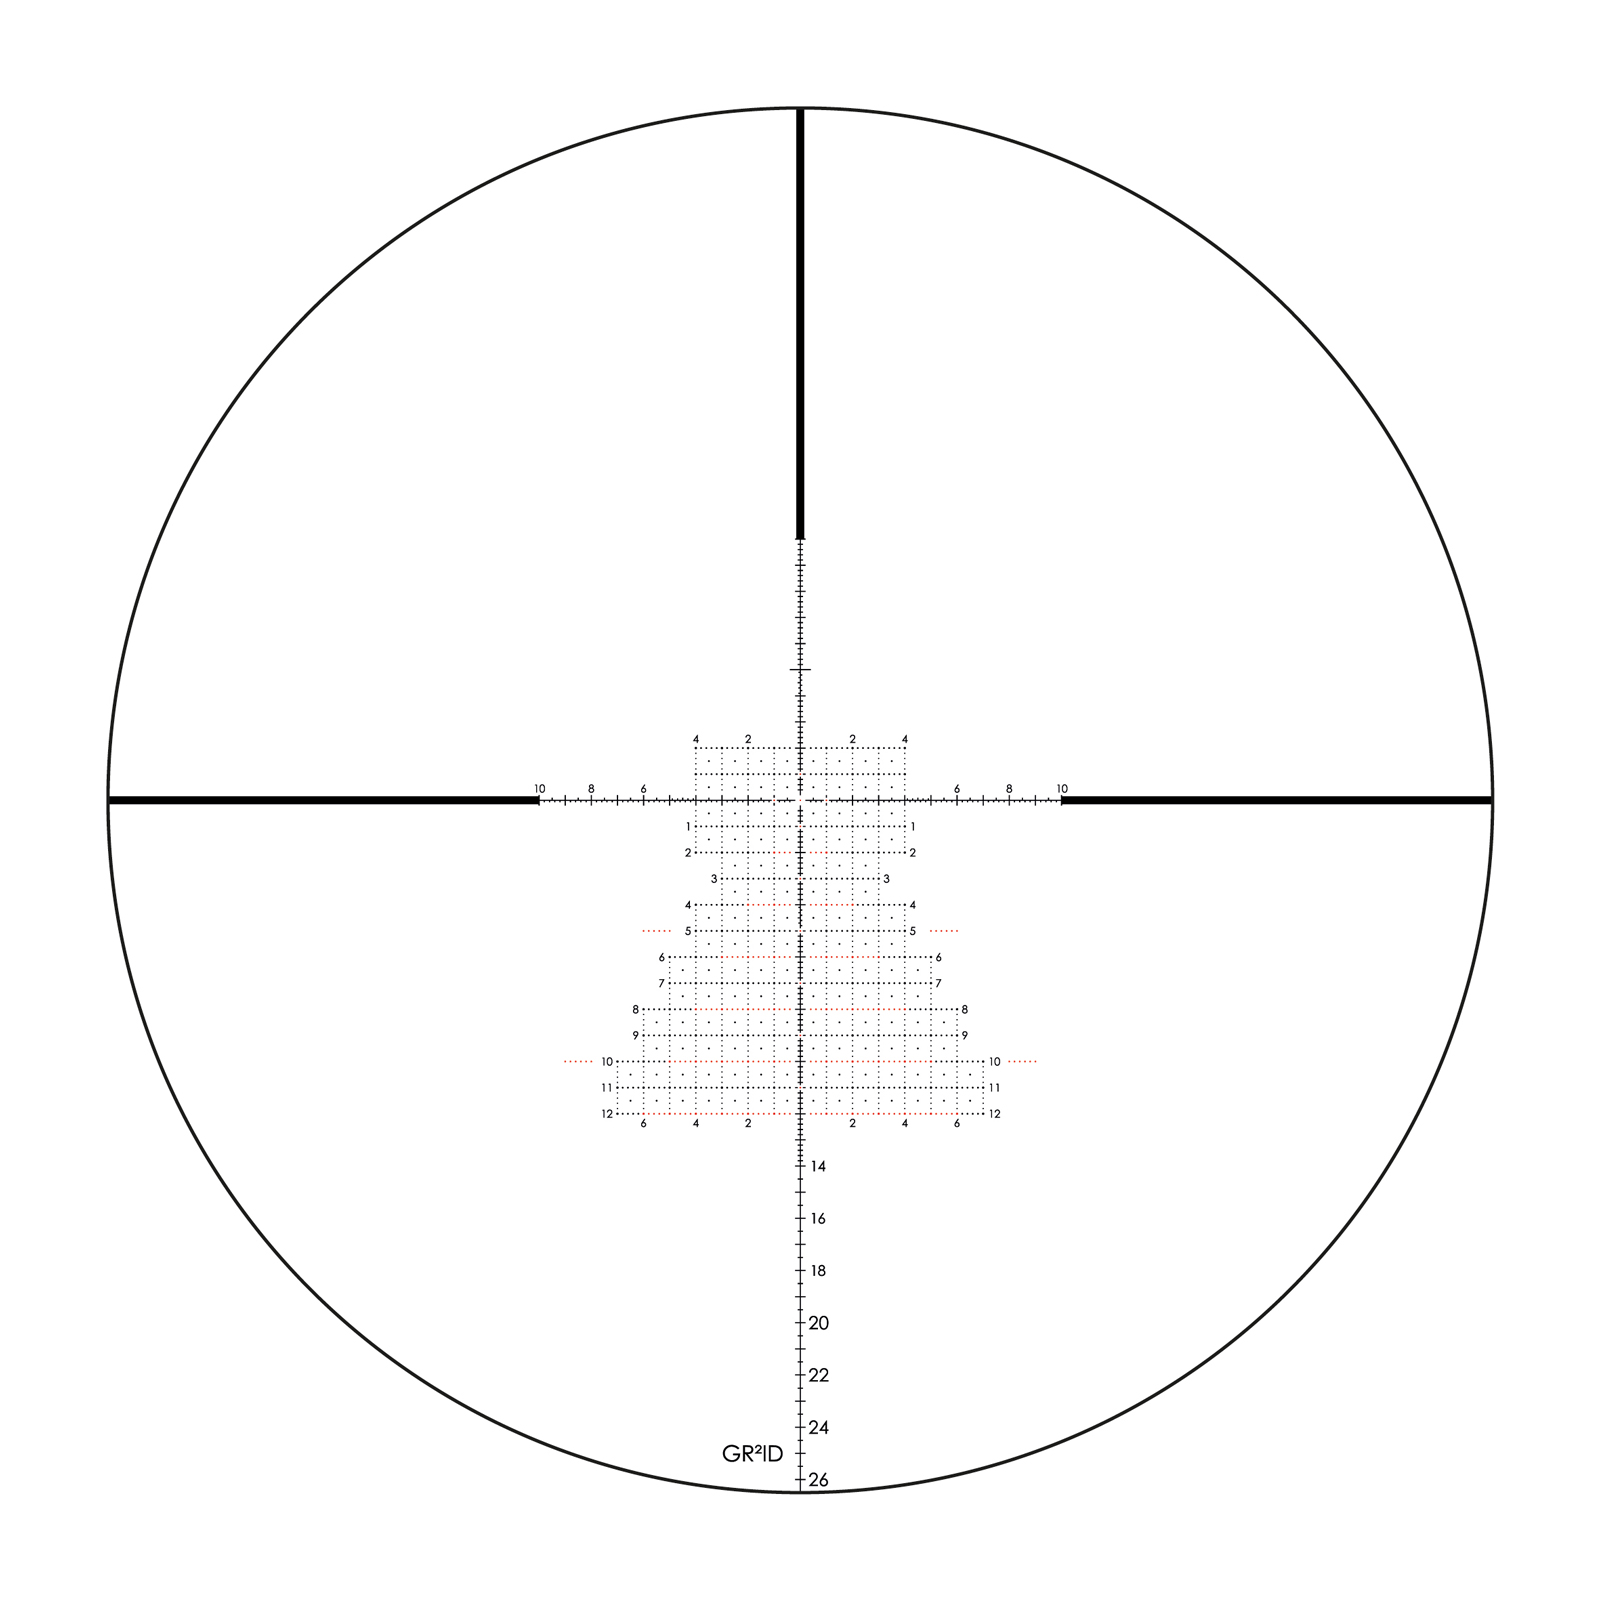 New intuitive reticle GR²ID for practical precision rifle competition shooters